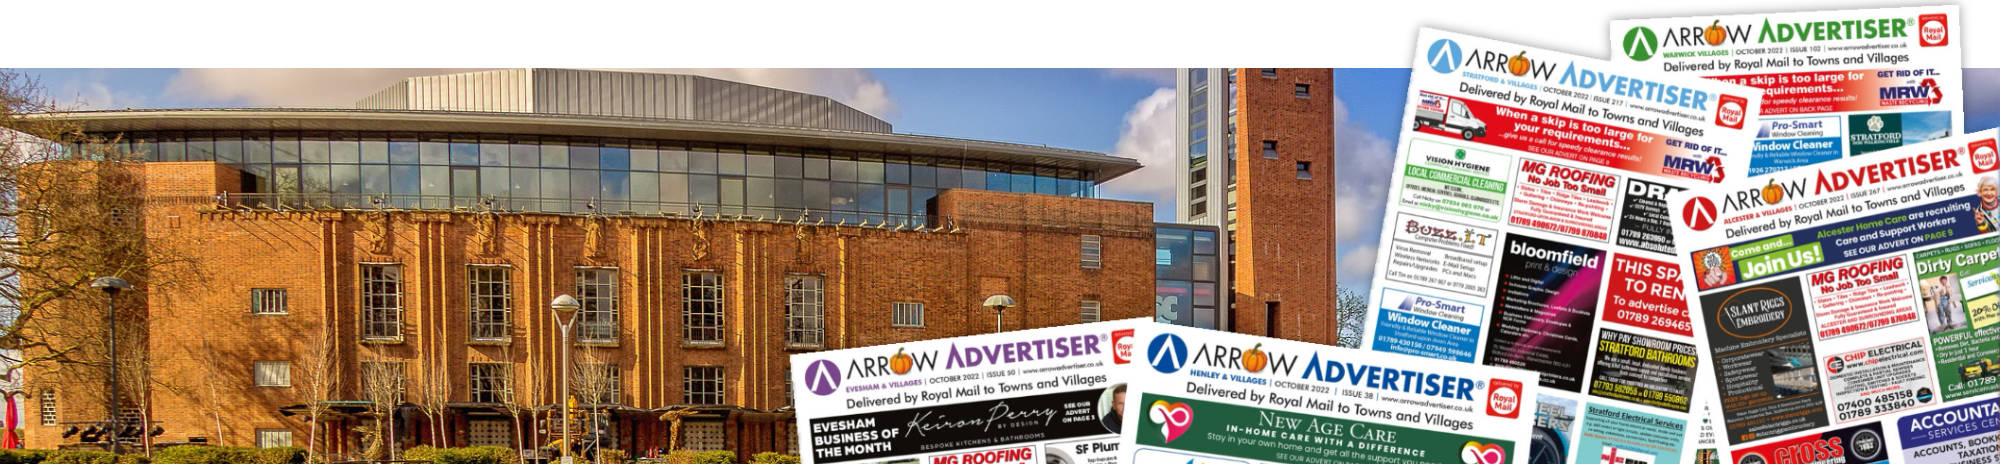 The Arrow Advertiser - Latest Issue eMags